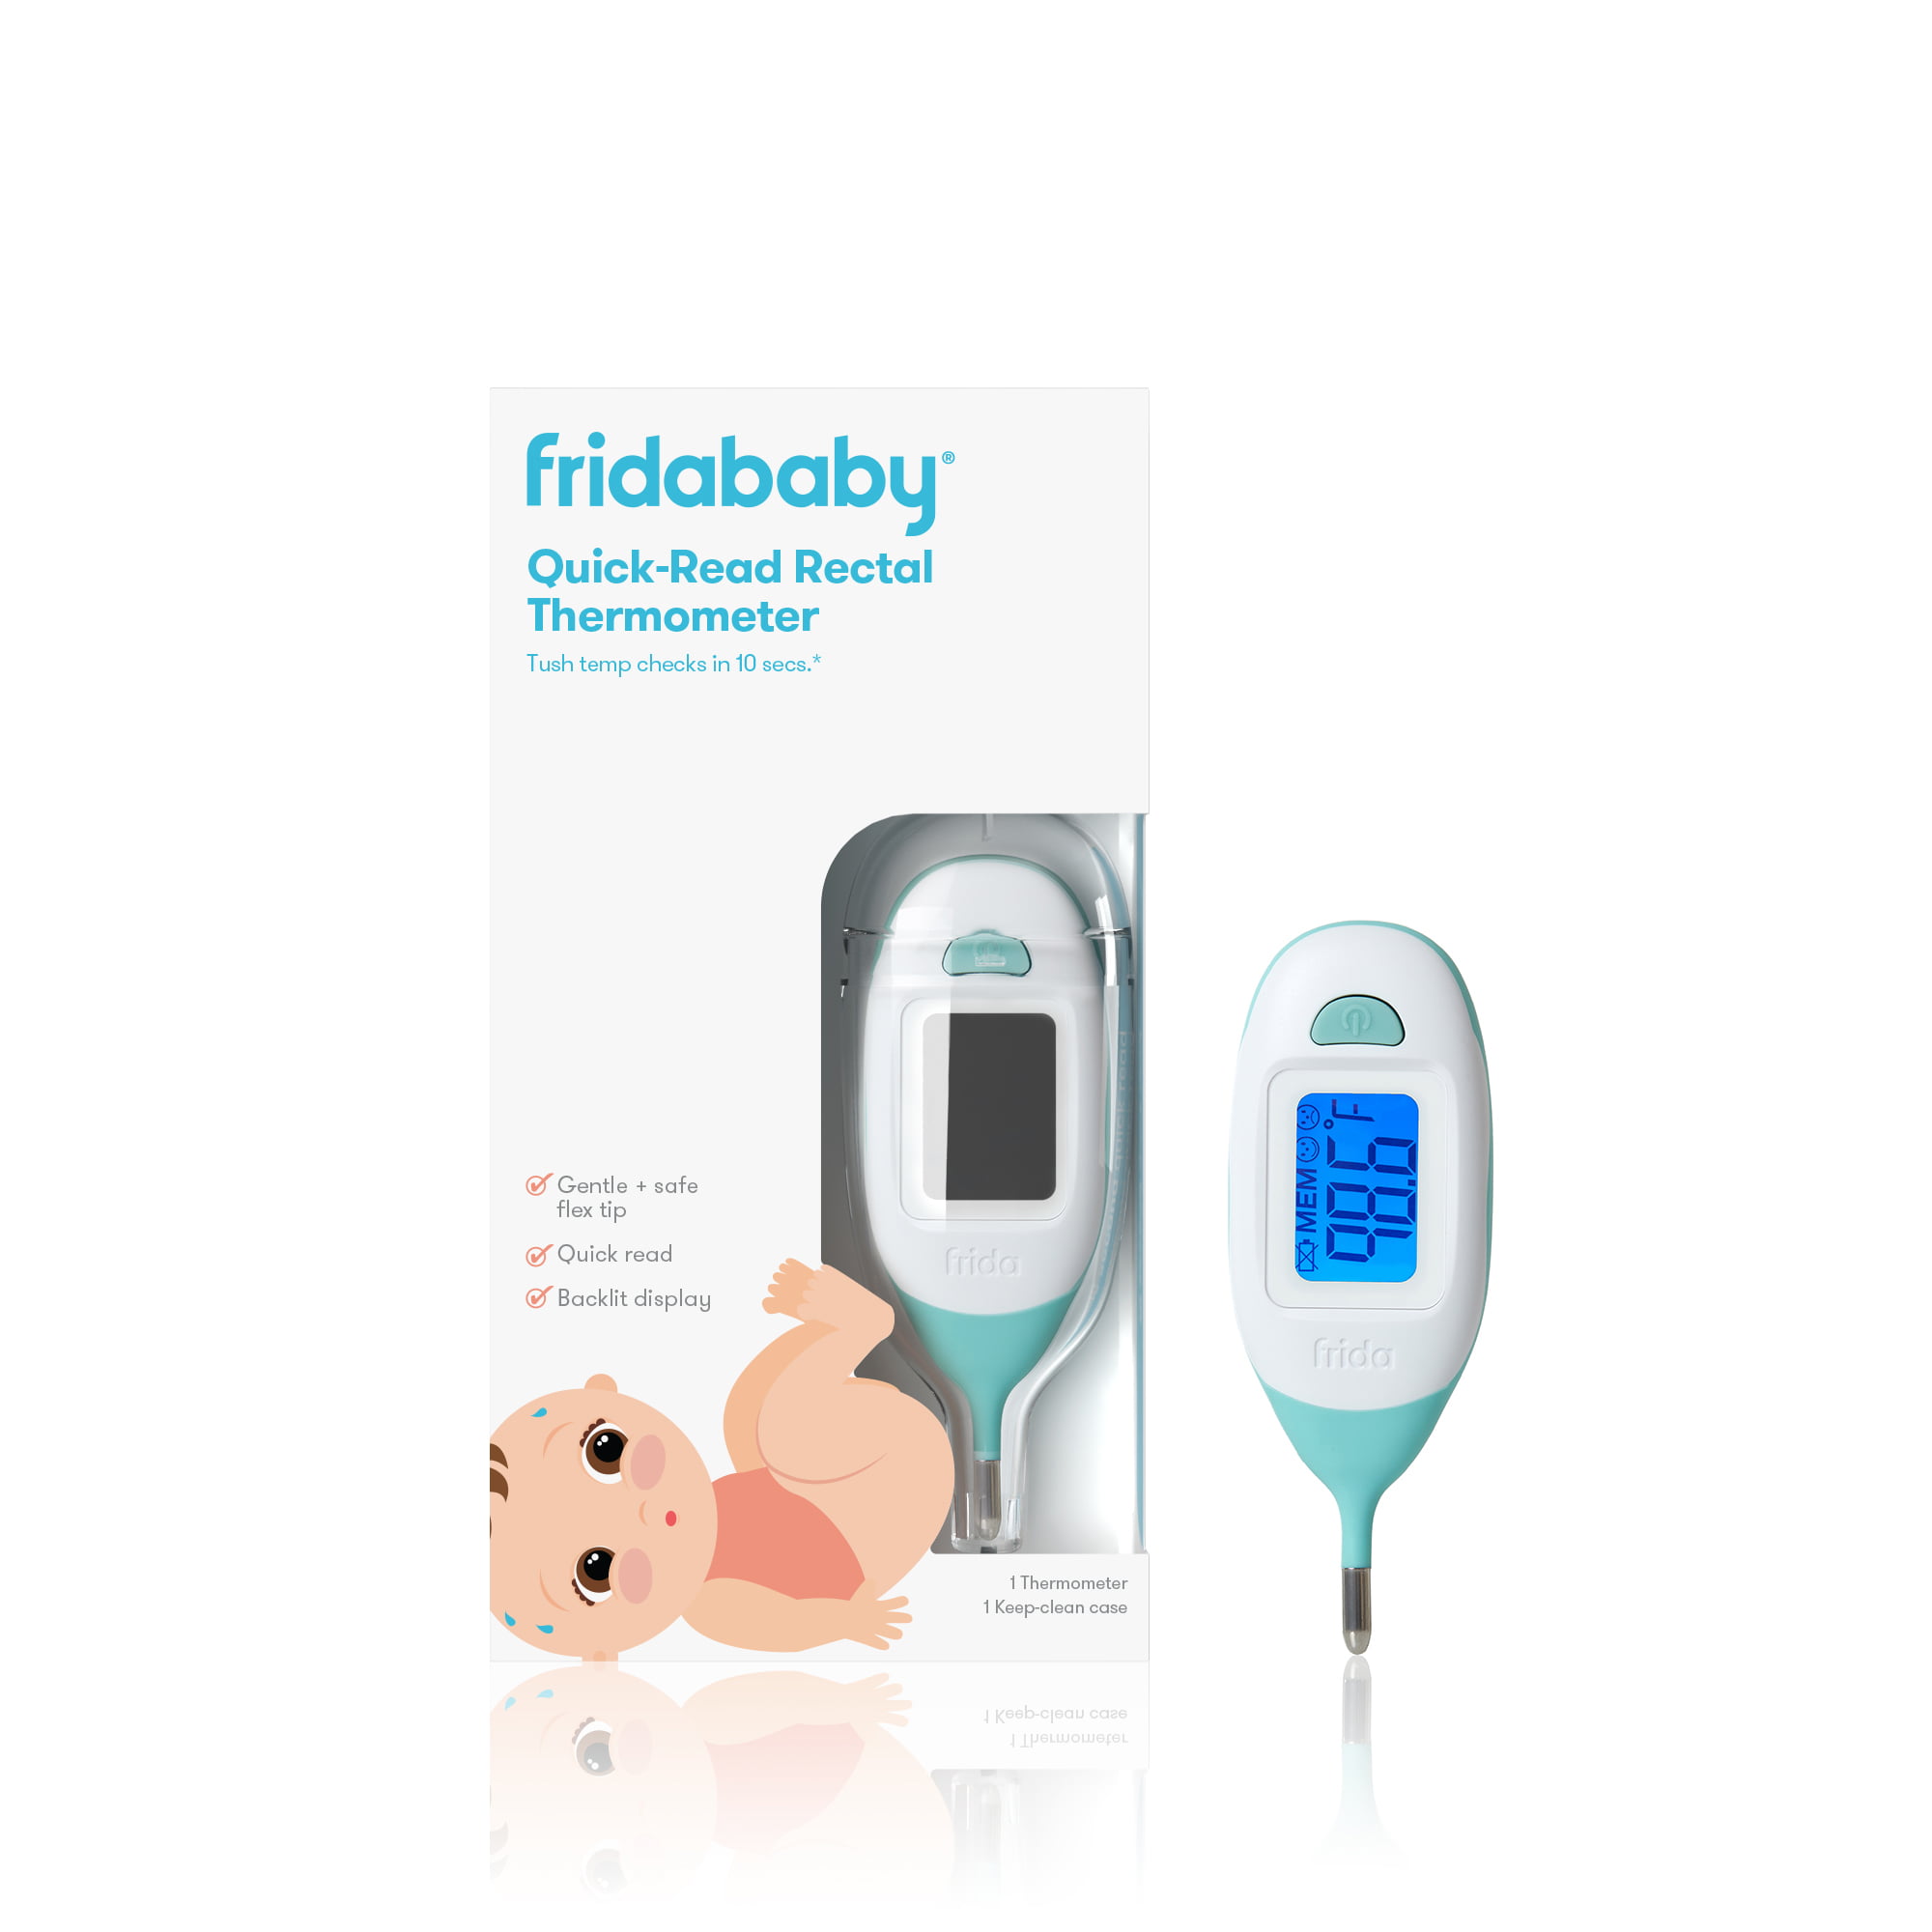 Frida Baby Quick-Read Digital Rectal Thermometer for Accurate Infant Temperature Readings - image 2 of 11